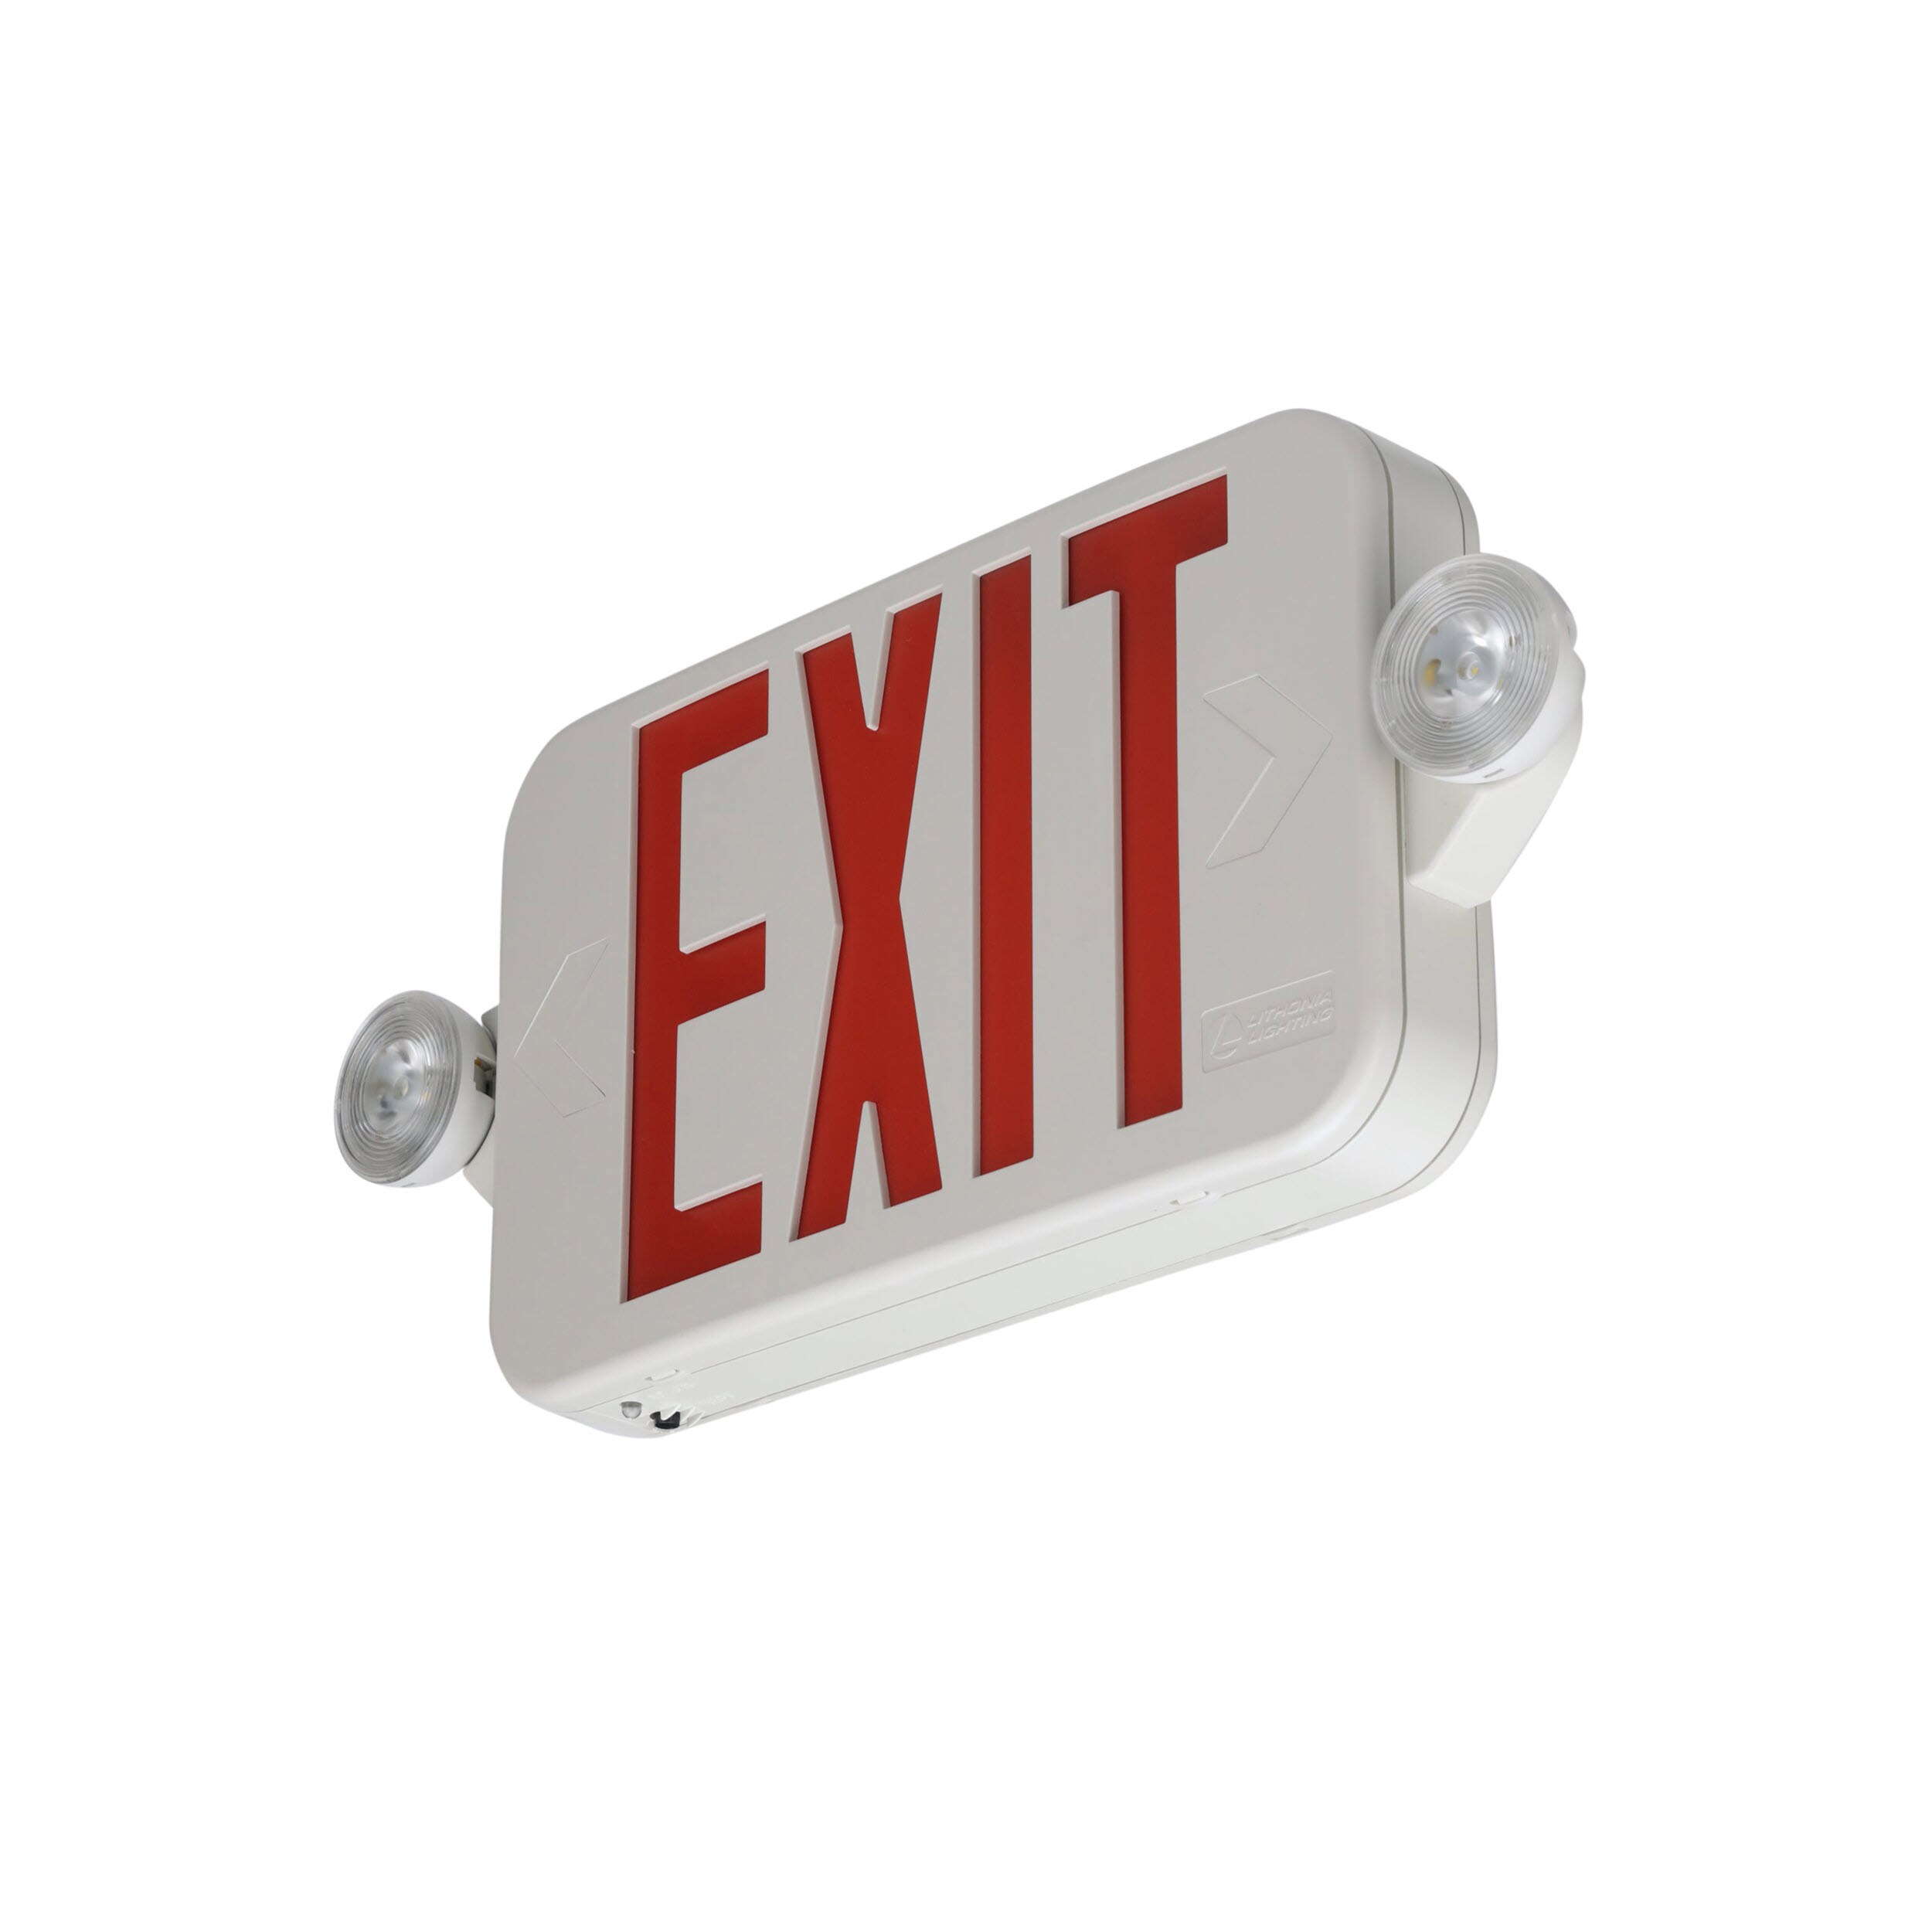 Lithonia Lighting 210lan LED Red Thermoplastic Exit Sign for sale online 